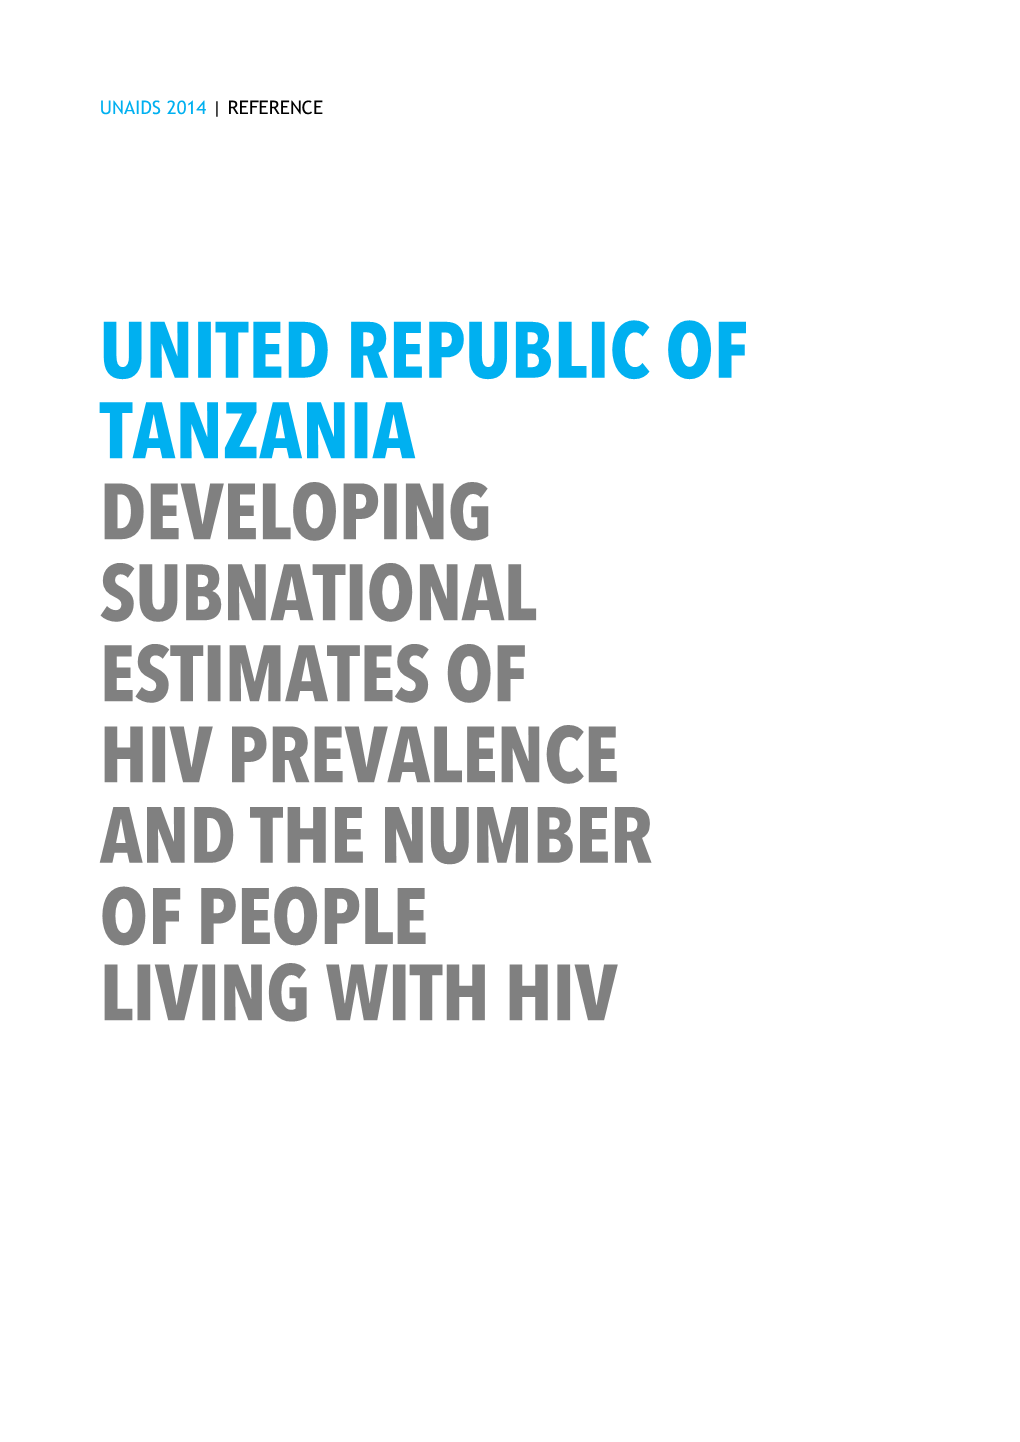 Tanzania Developing Subnational Estimates of Hiv Prevalence and the Number of People